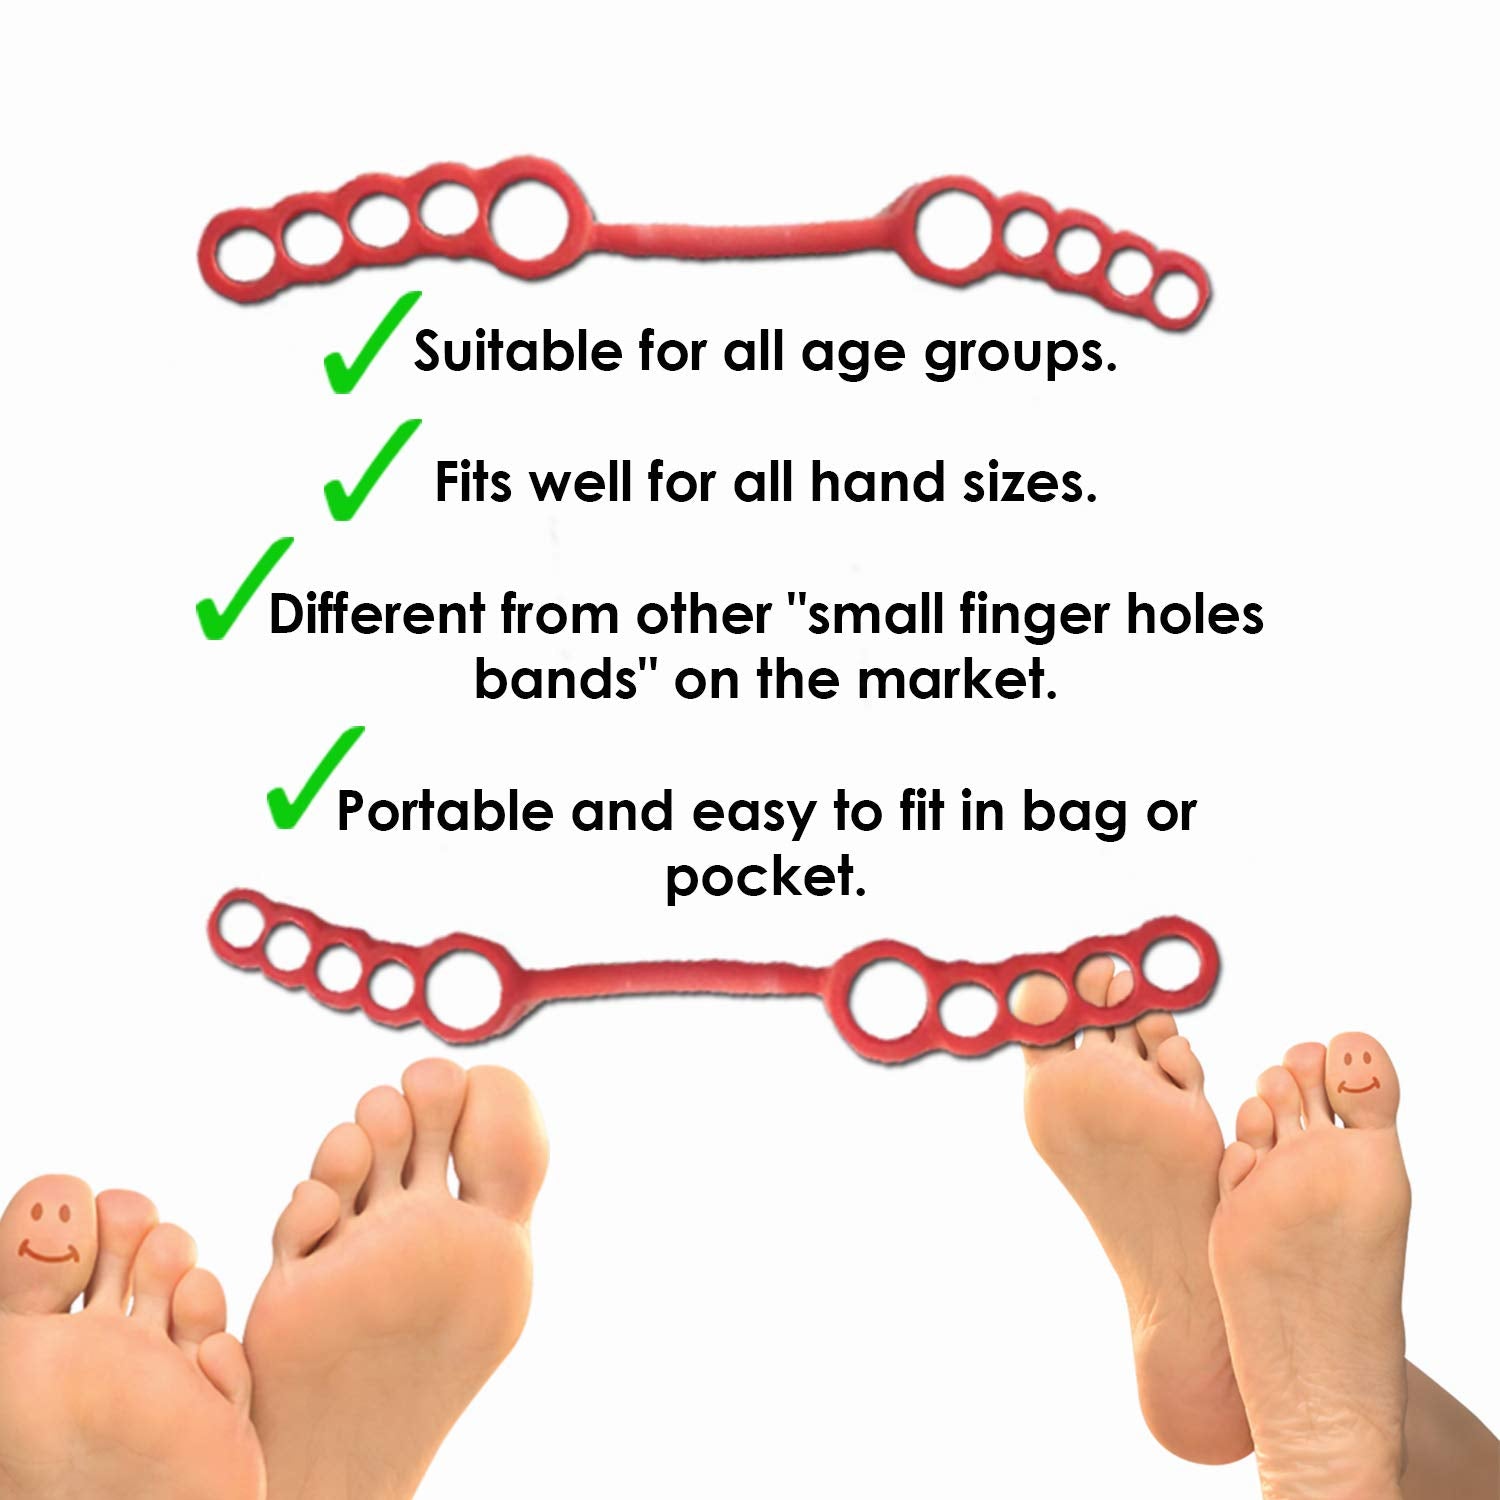 activelife - Toe Separators to Help Correct and Strengthen Toes to Their Original Shape, Bunion Corrector For Women, Toe Spacers for Hammer Toe Straightening, Pedi Spacers For Foot Care